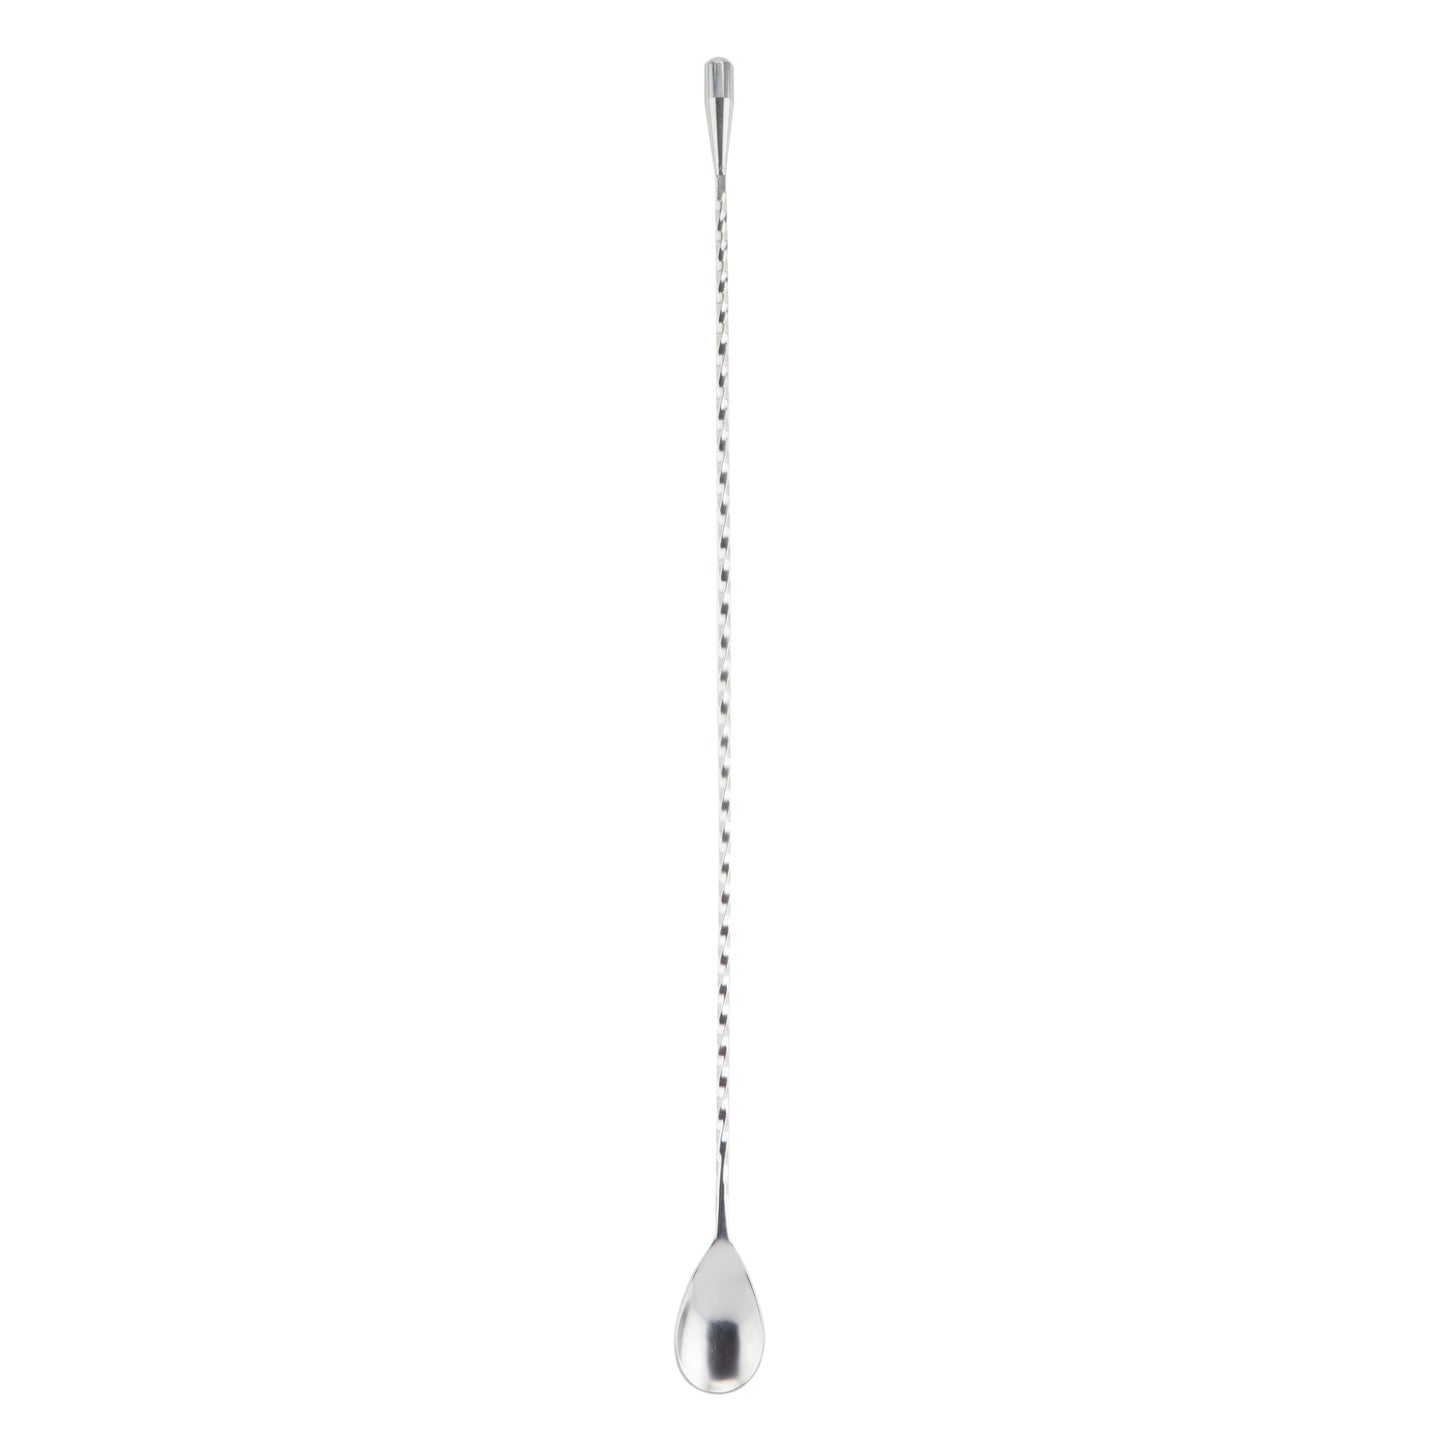 Weighted Bar Spoon -Stainless Steel